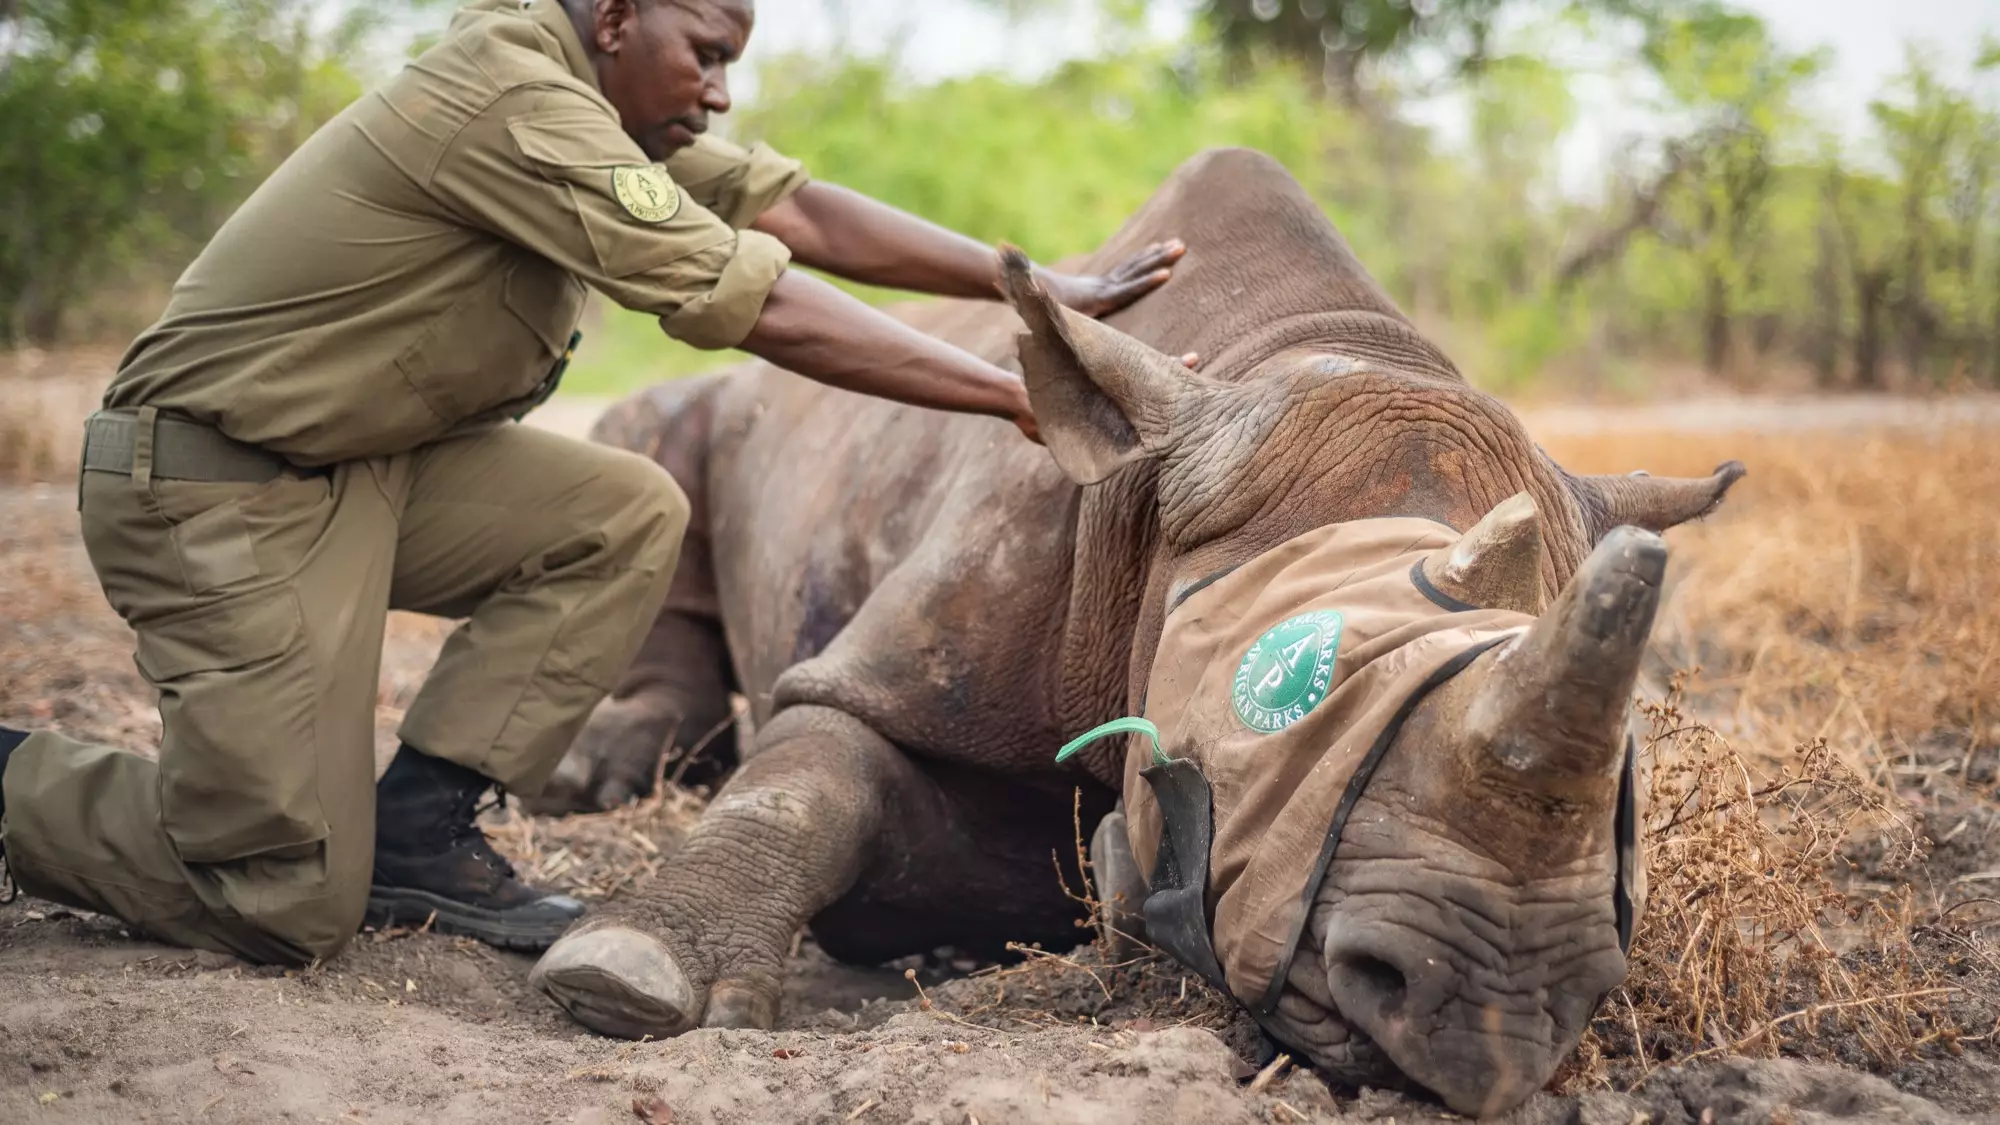 British Troops Help To Relocate Endangered Black Rhinos Away From Hunters